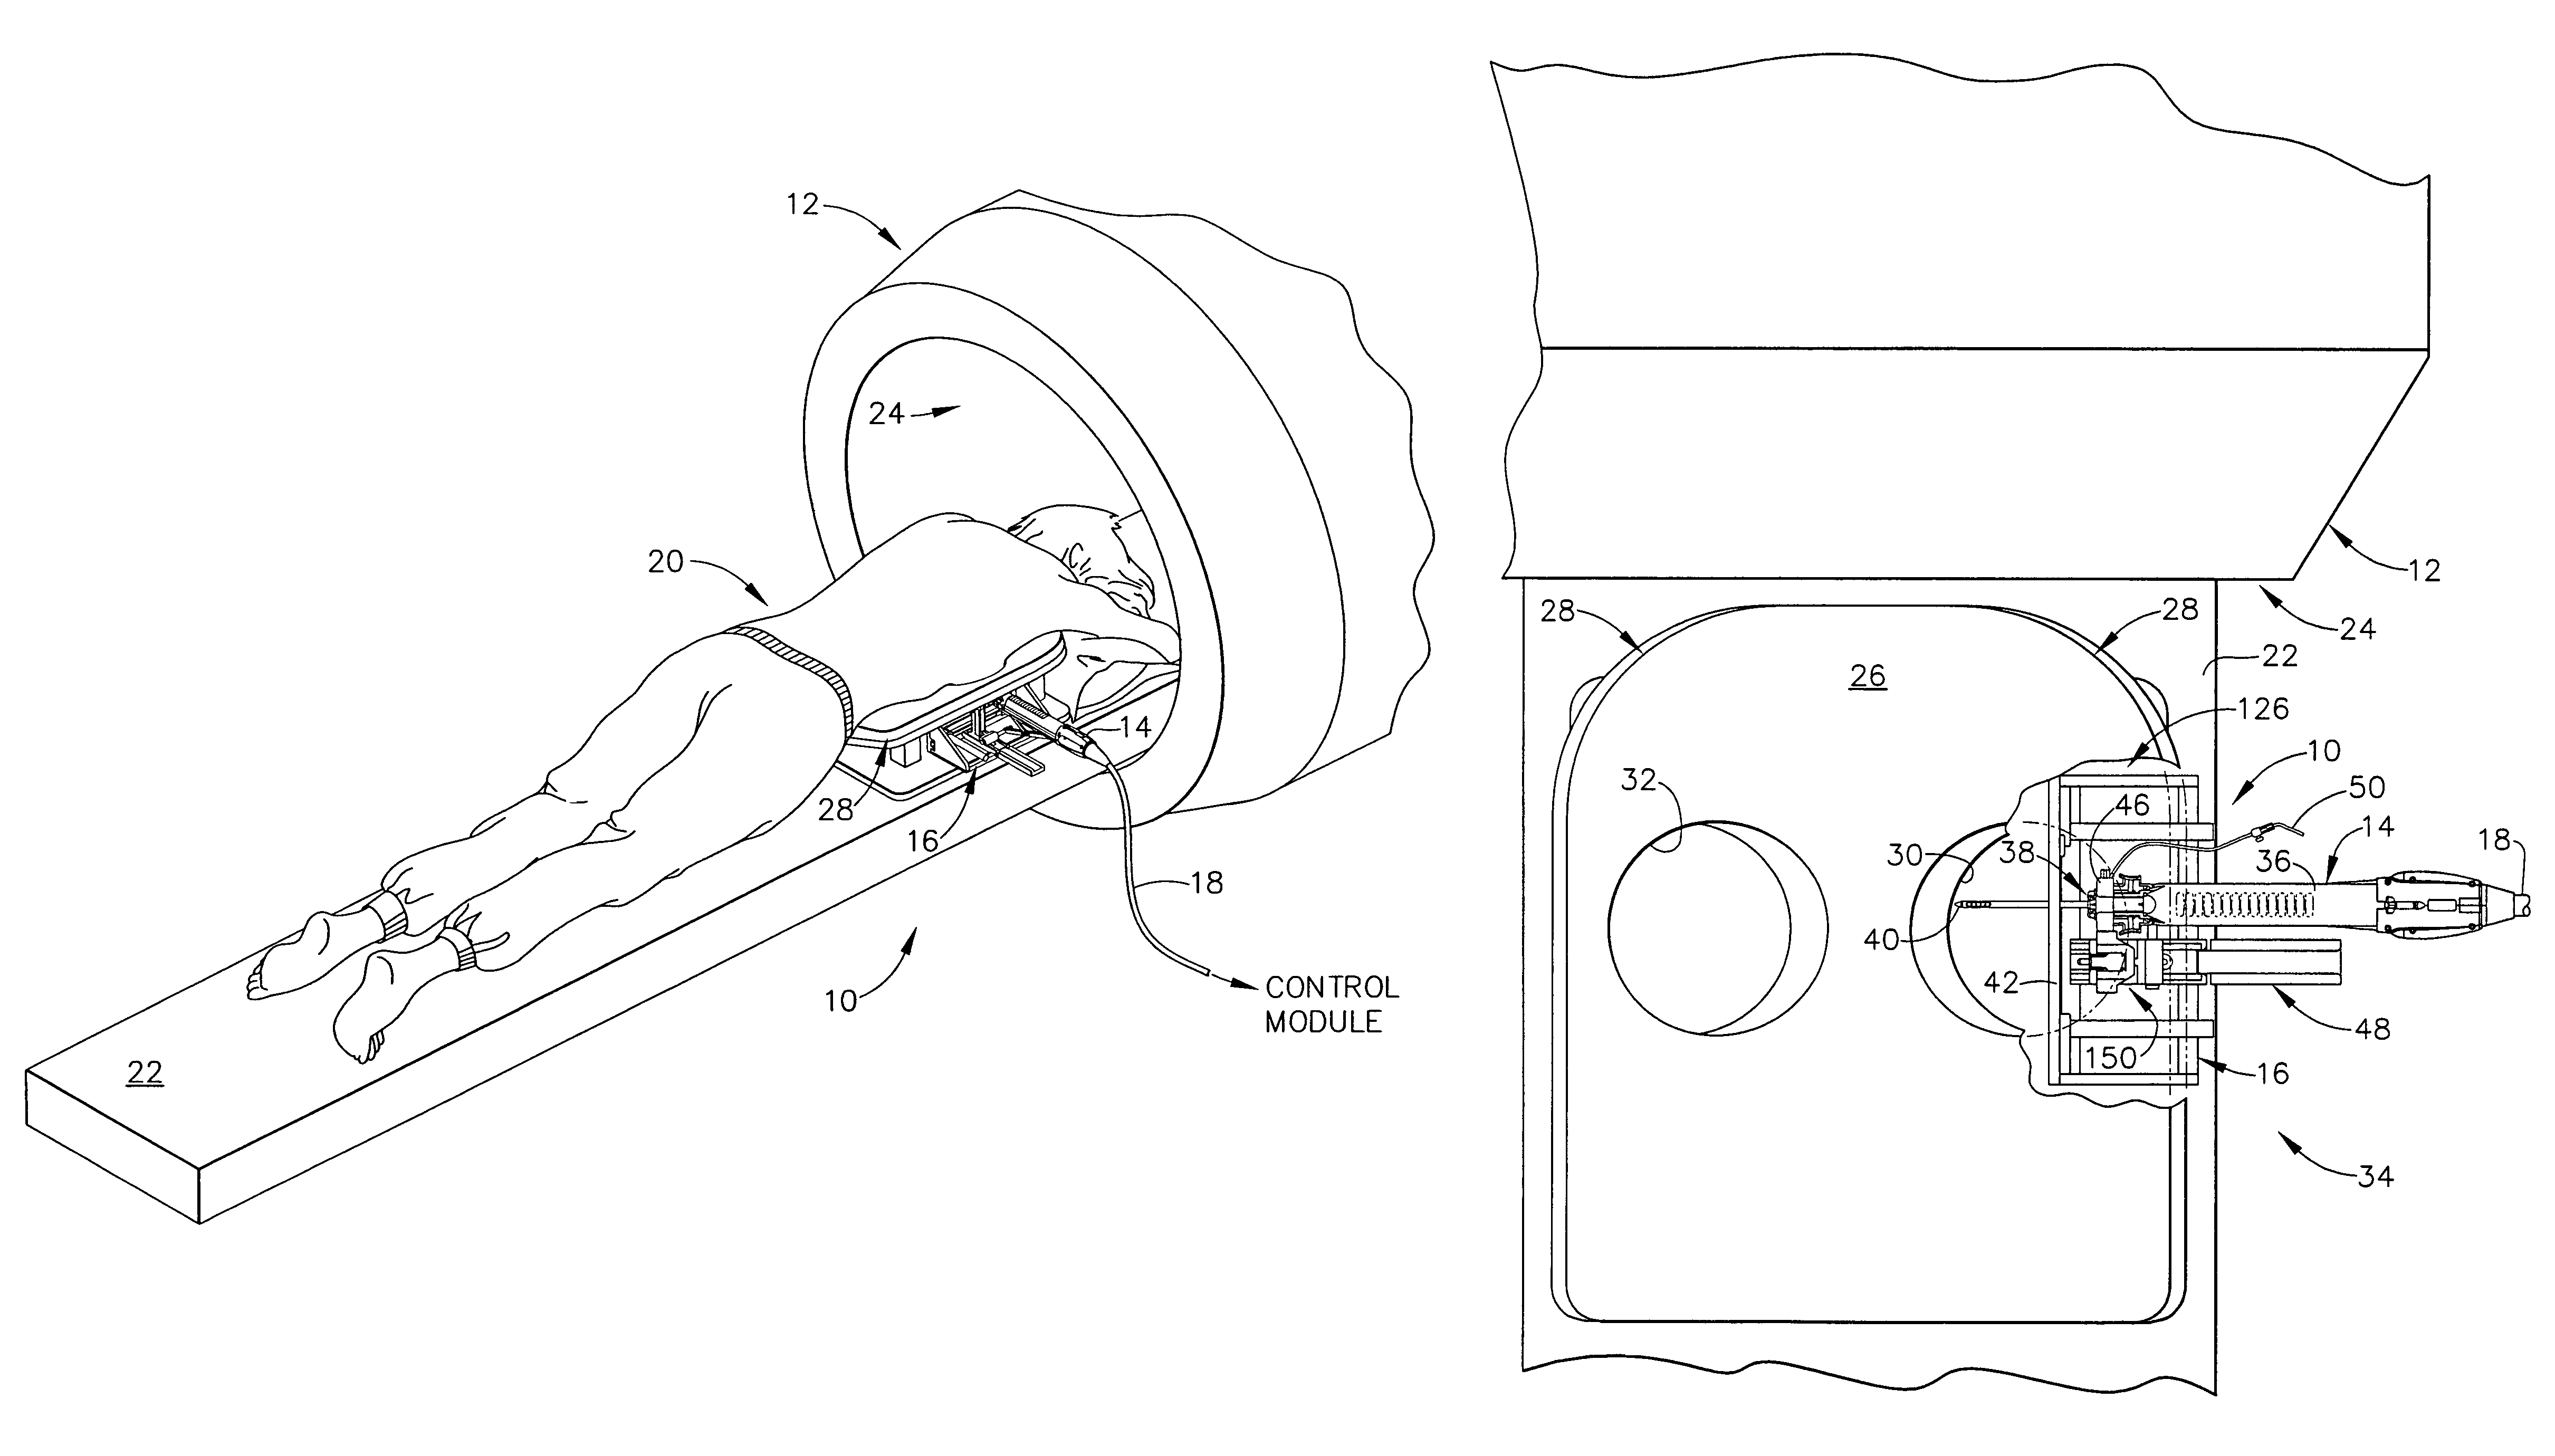 Method for using an MRI compatible biopsy device with detachable probe